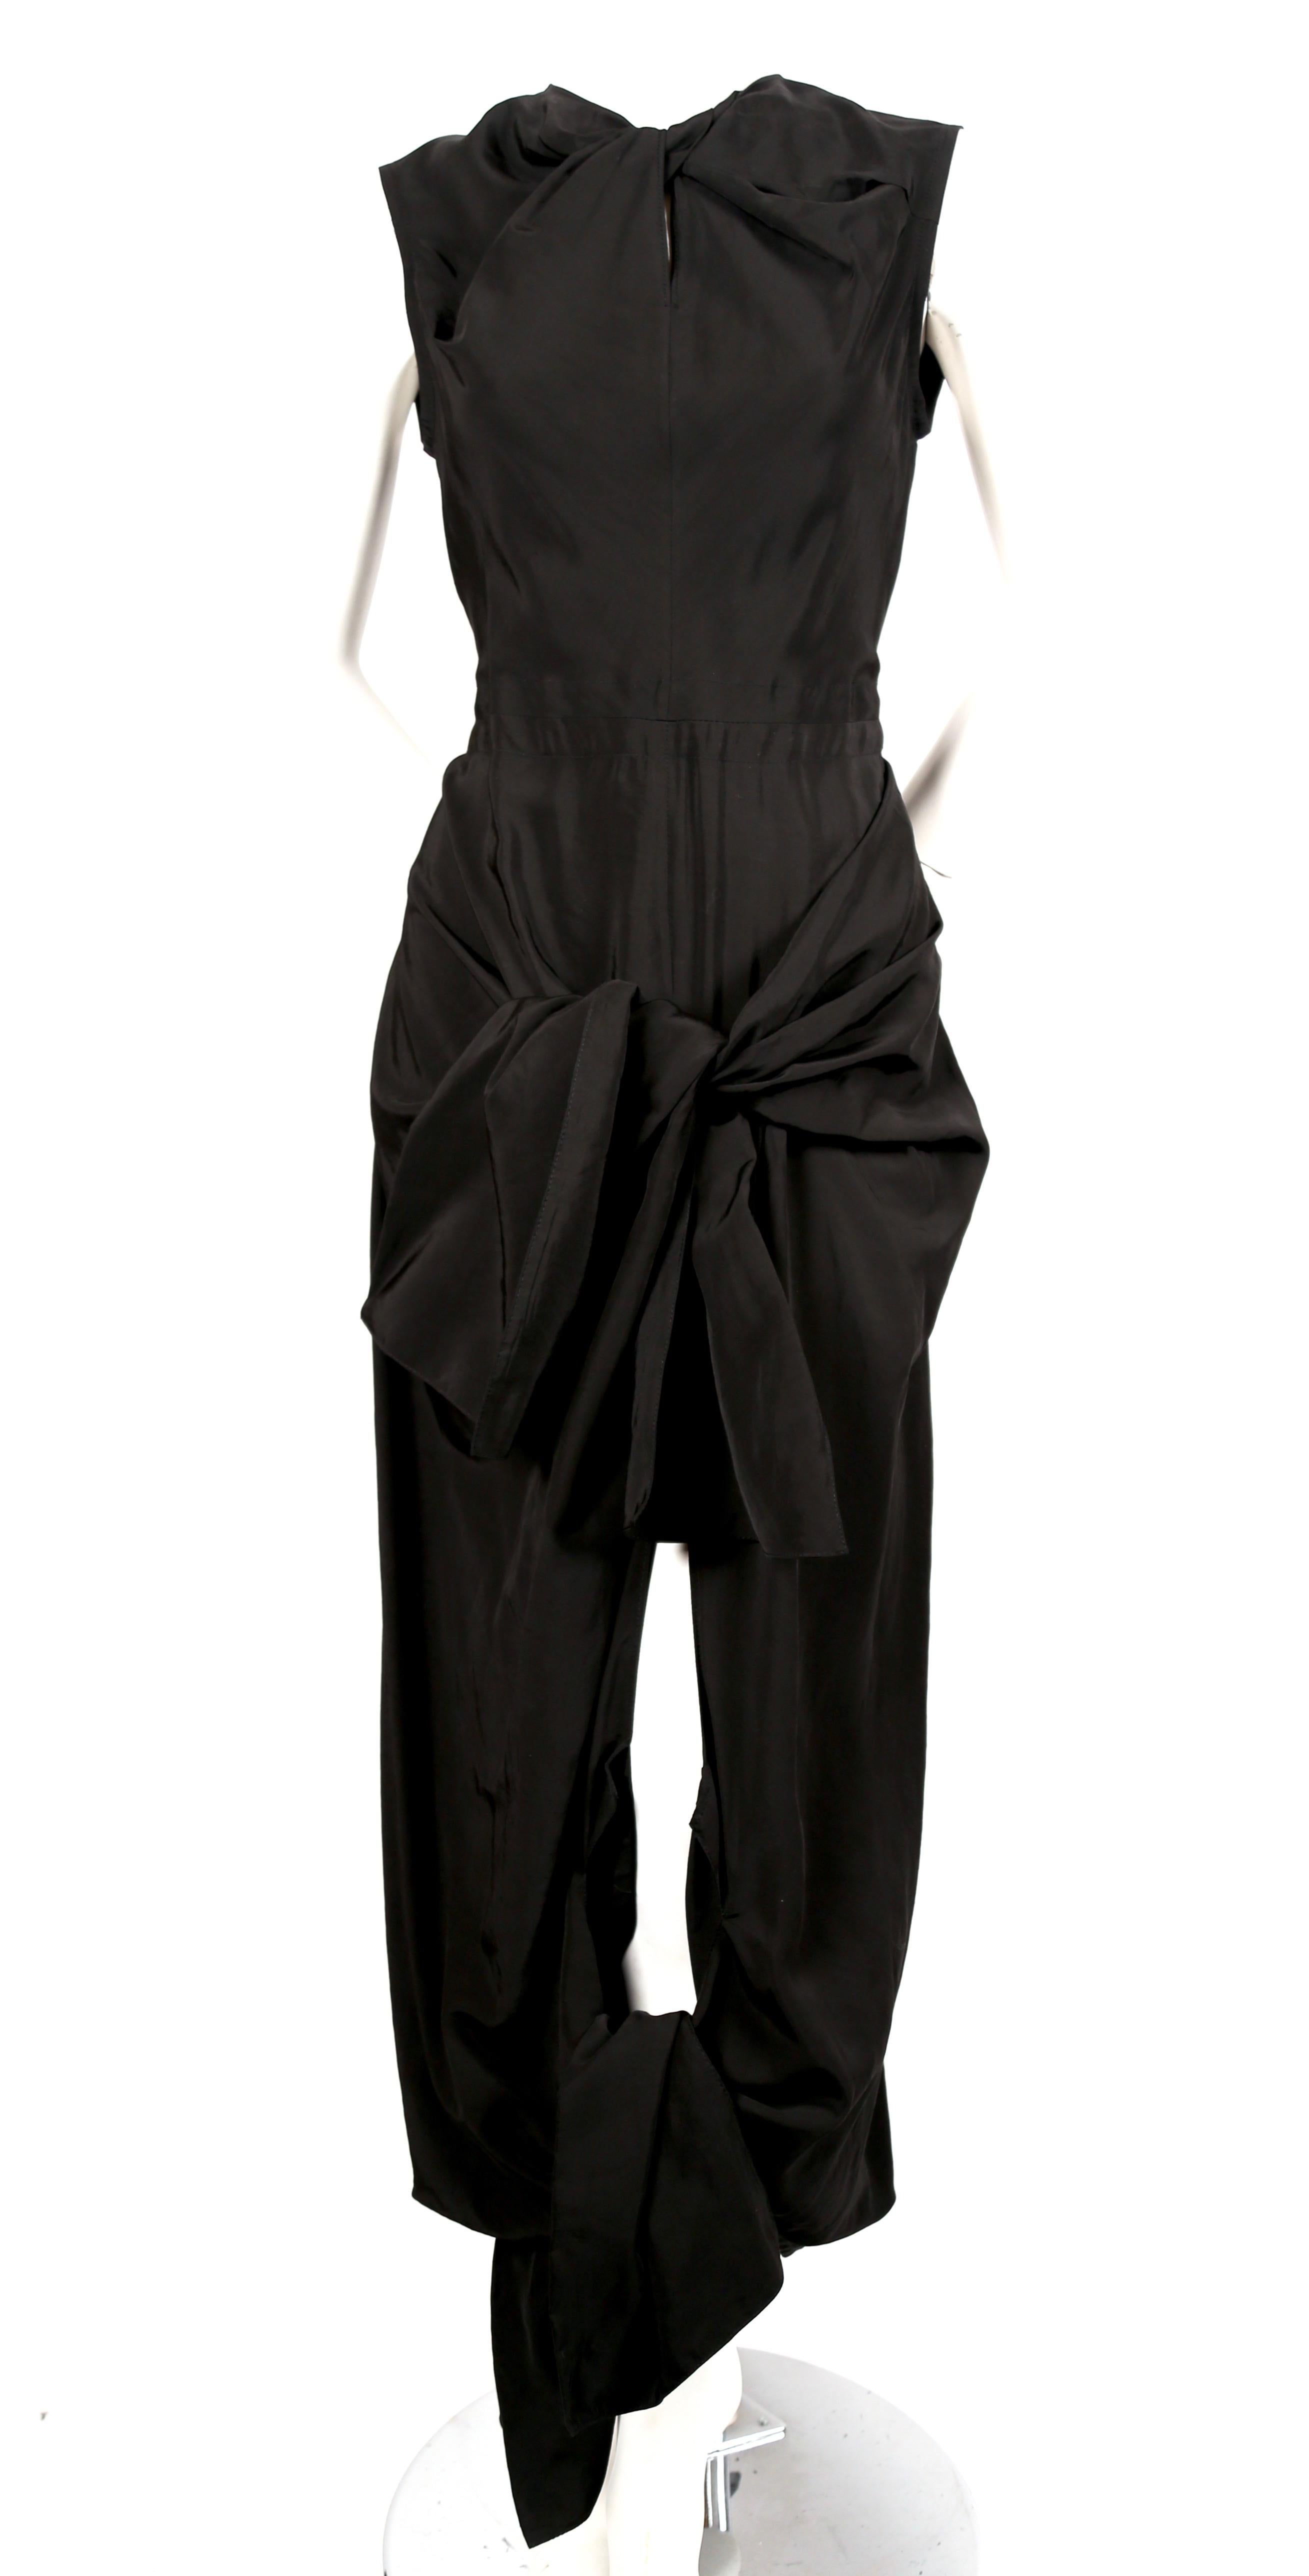 Jet-black dress with twisted neckline, ties at hips and cut out at back designed by Phoebe Philo for Celine. French size 36. Approximate measurements: shoulder 13.75